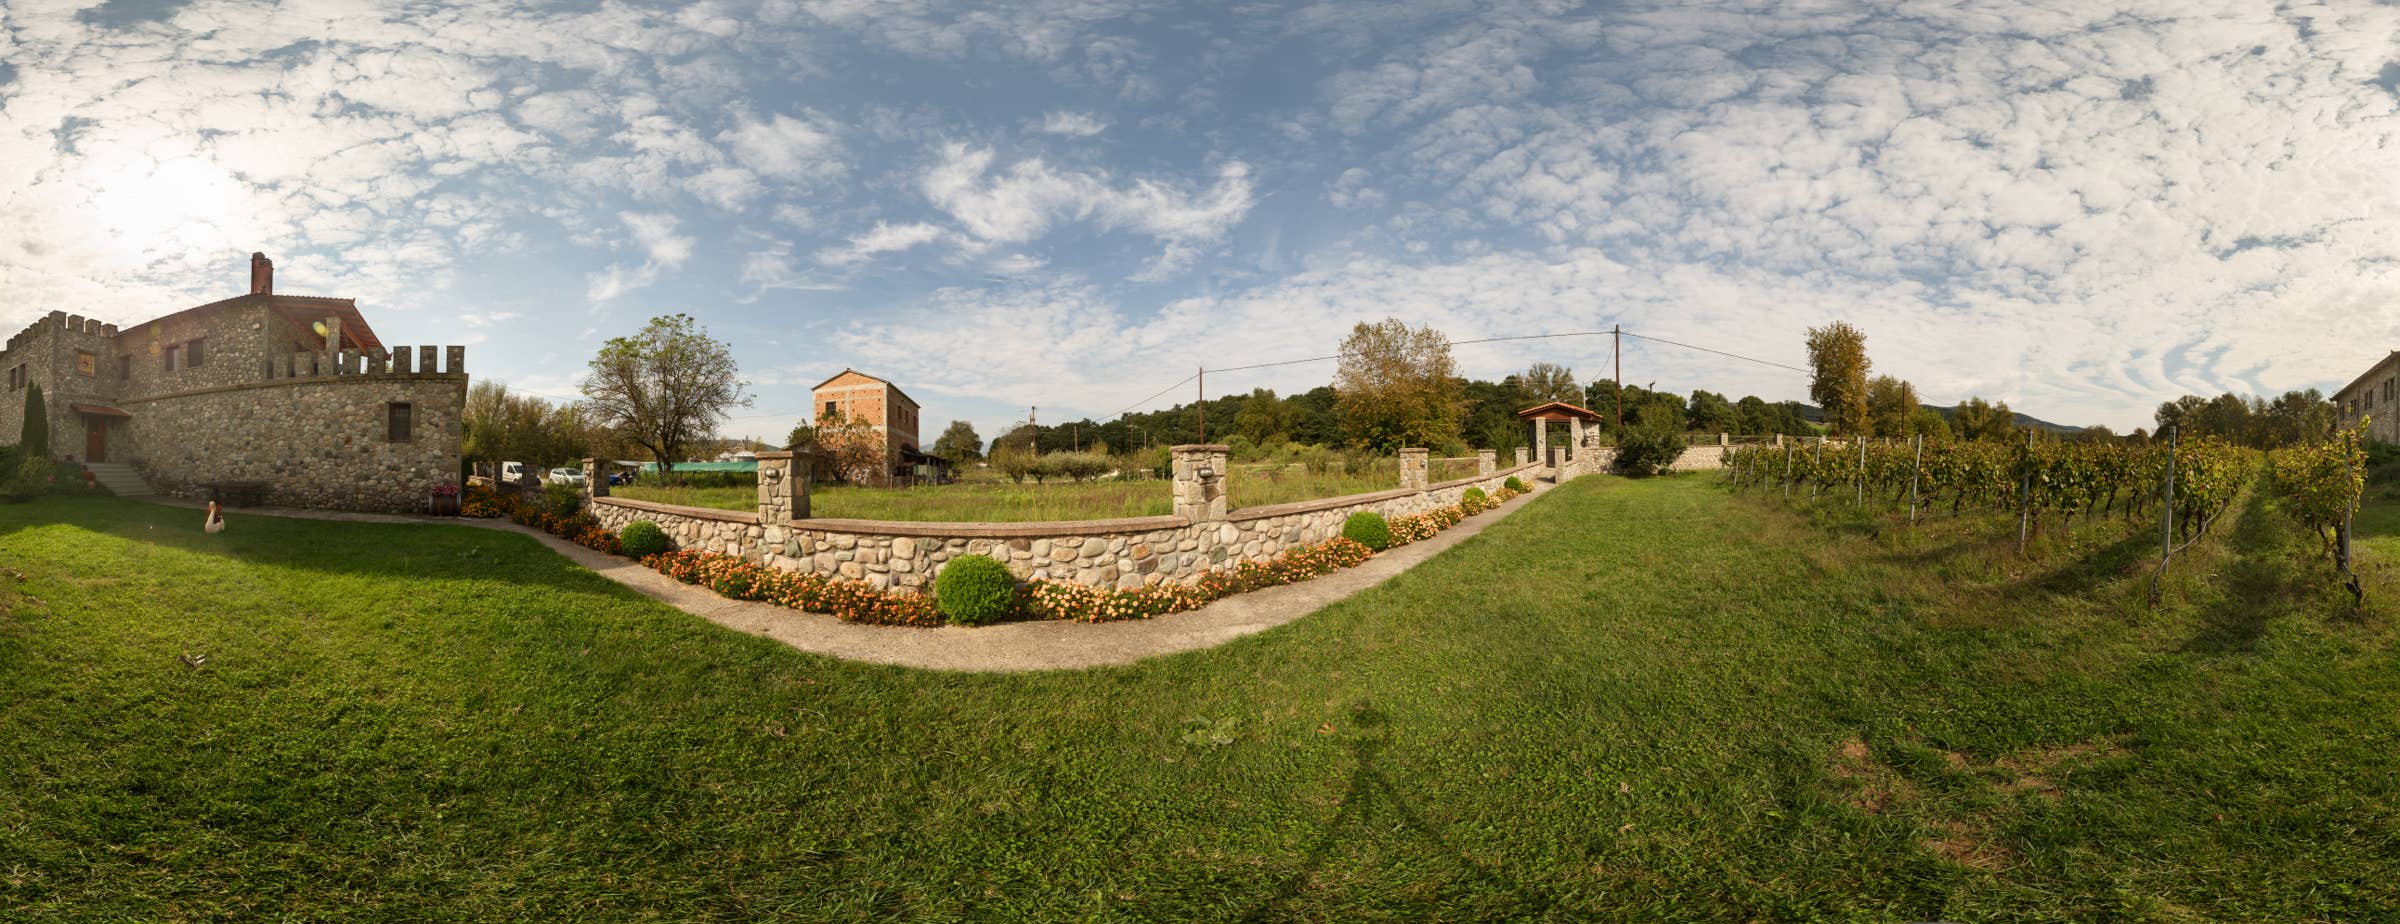 360° panoramic image outside the Liakou Winery showing the main building and its entrance and a vineyard in front of the building. 